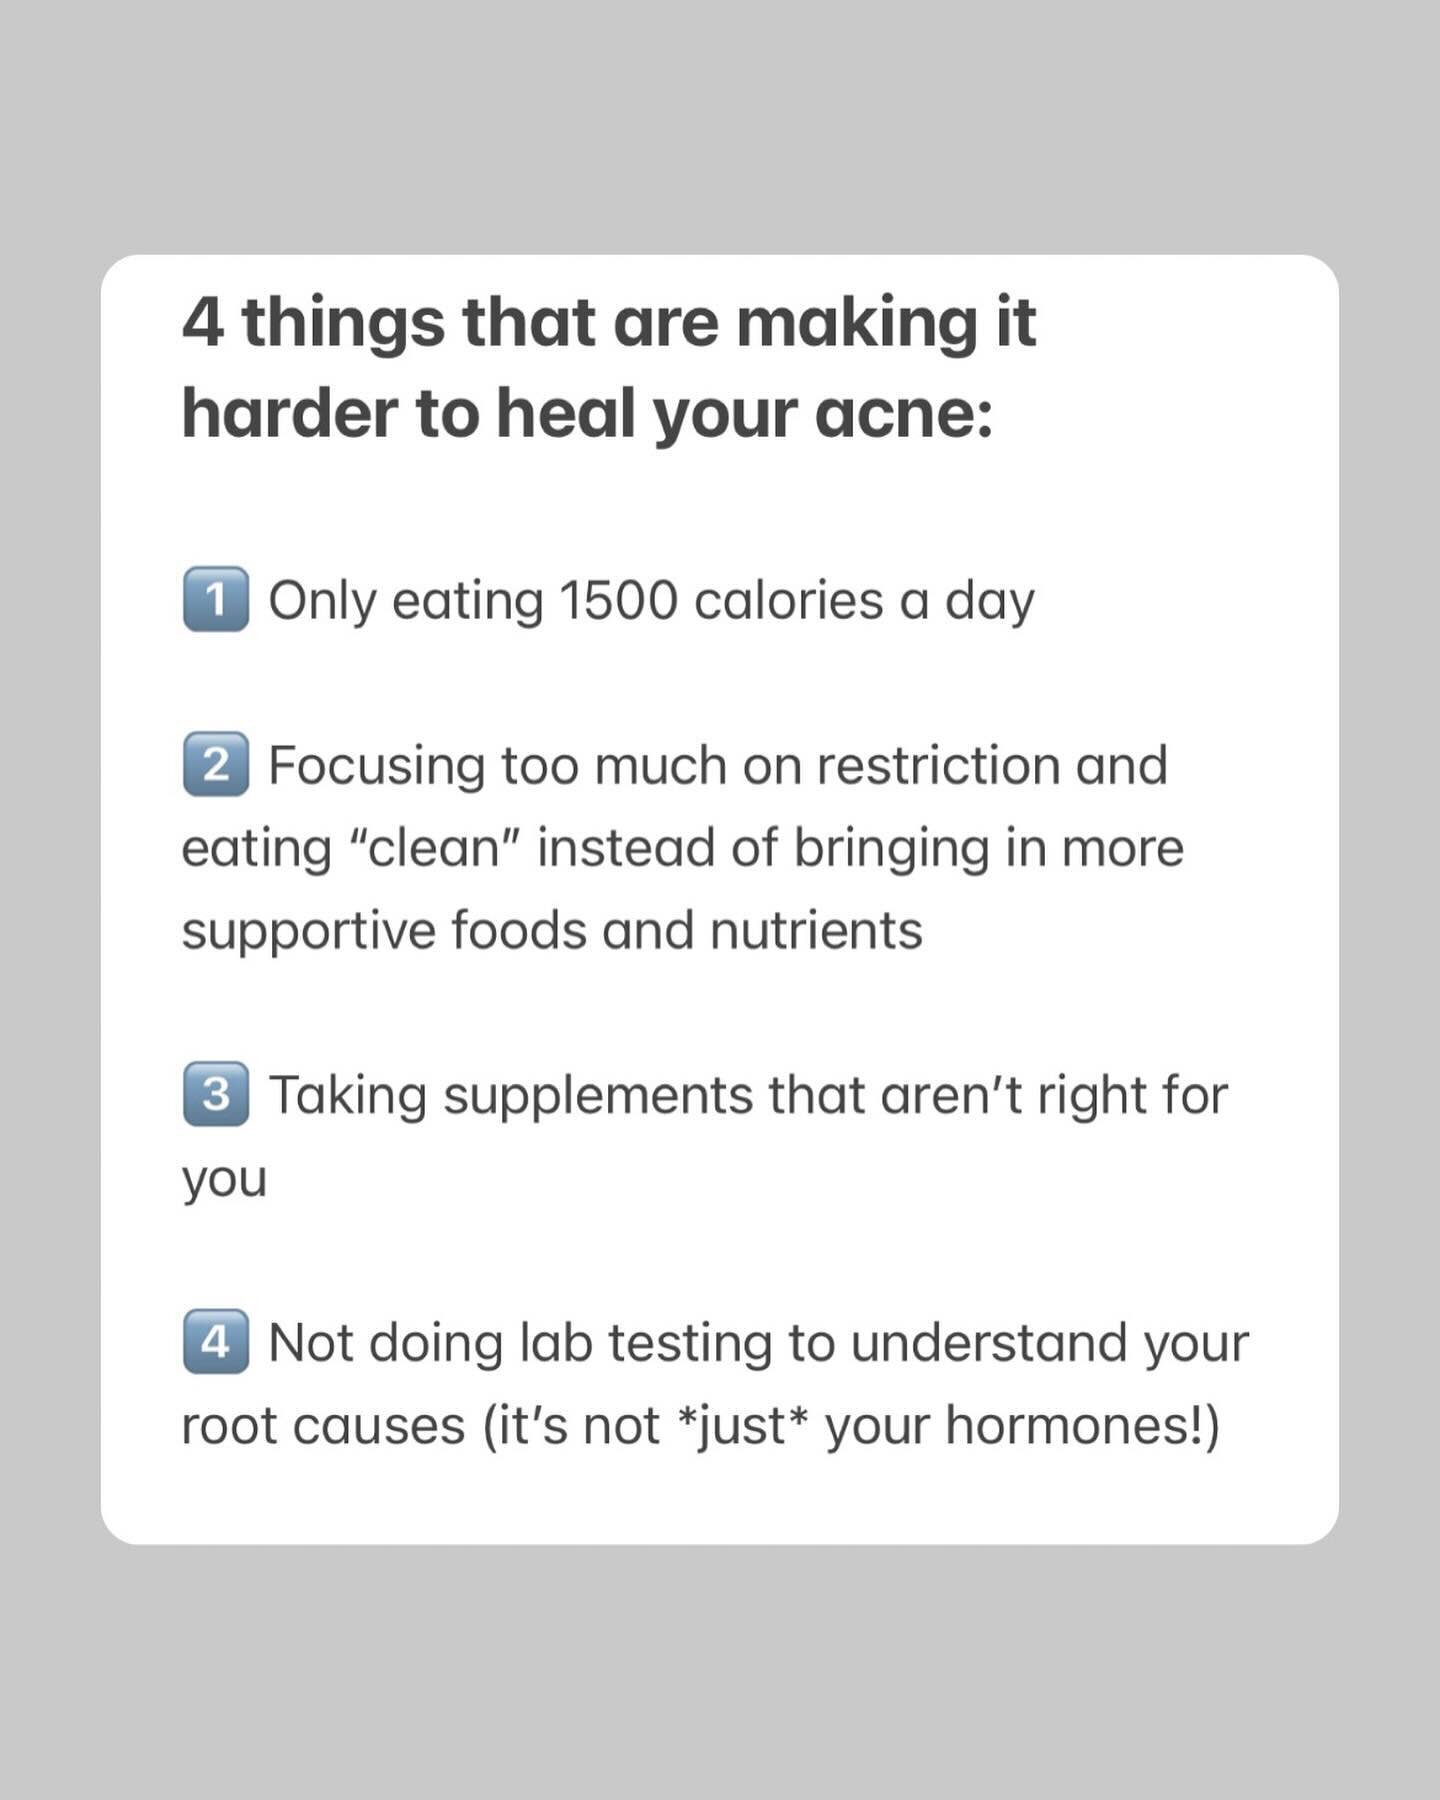 If you feel stuck in healing your acne, this is for you 👇⁣
⁣
Hard truth: you can&rsquo;t expect your acne to heal when you aren&rsquo;t giving your body it needs. ⁣
⁣
If you&rsquo;re not eating enough to support a healthy metabolism, your acne won&r